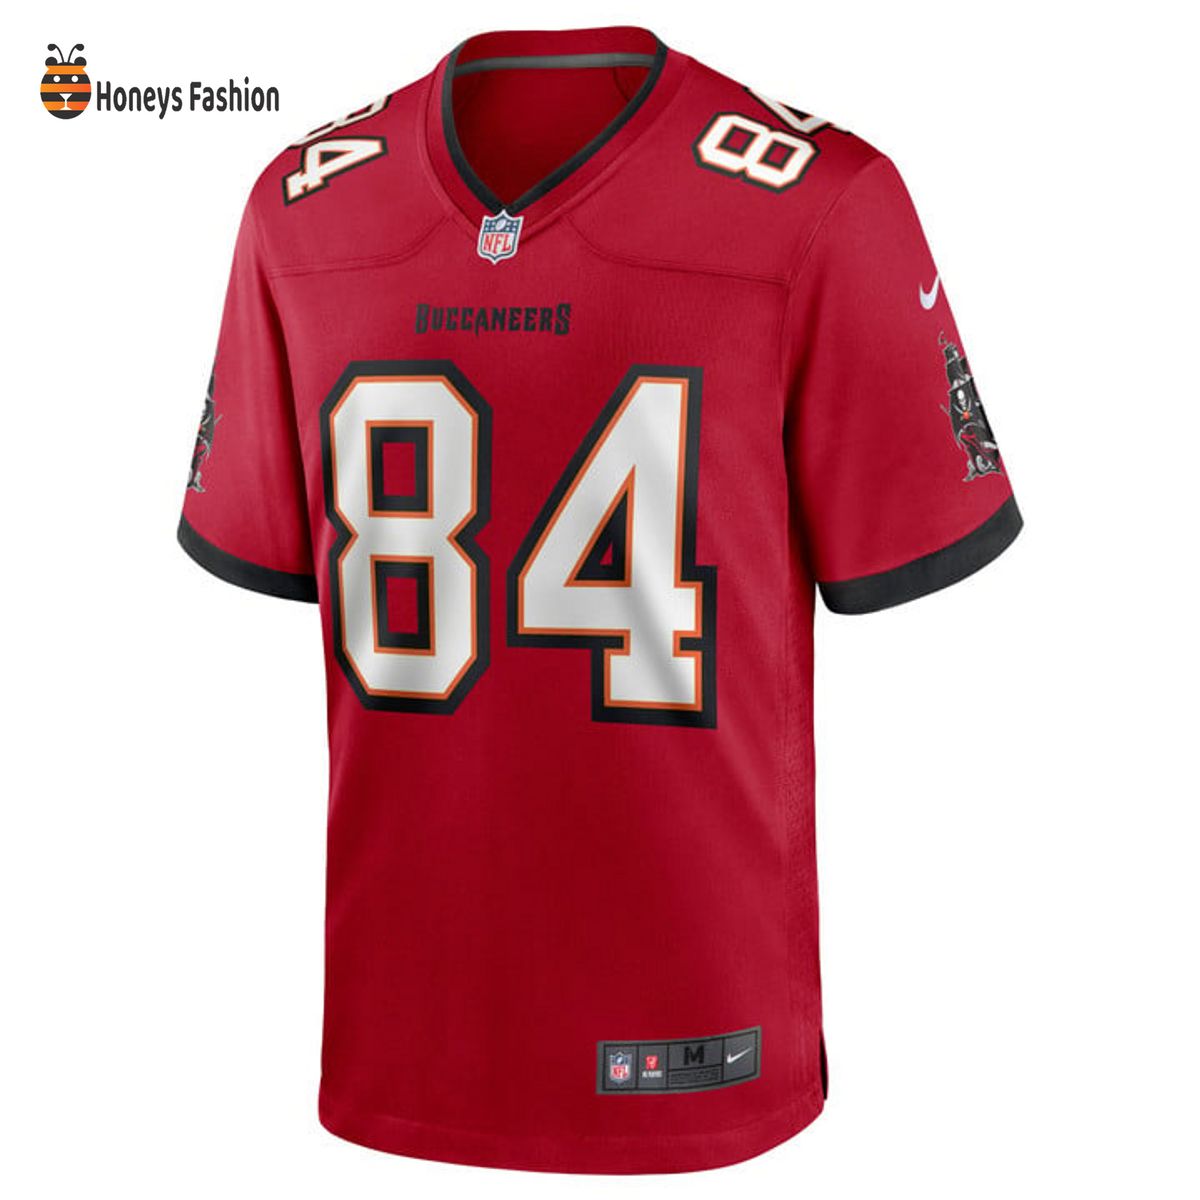 Cameron Brate Tampa Bay Buccaneers Nike Red Game Jersey